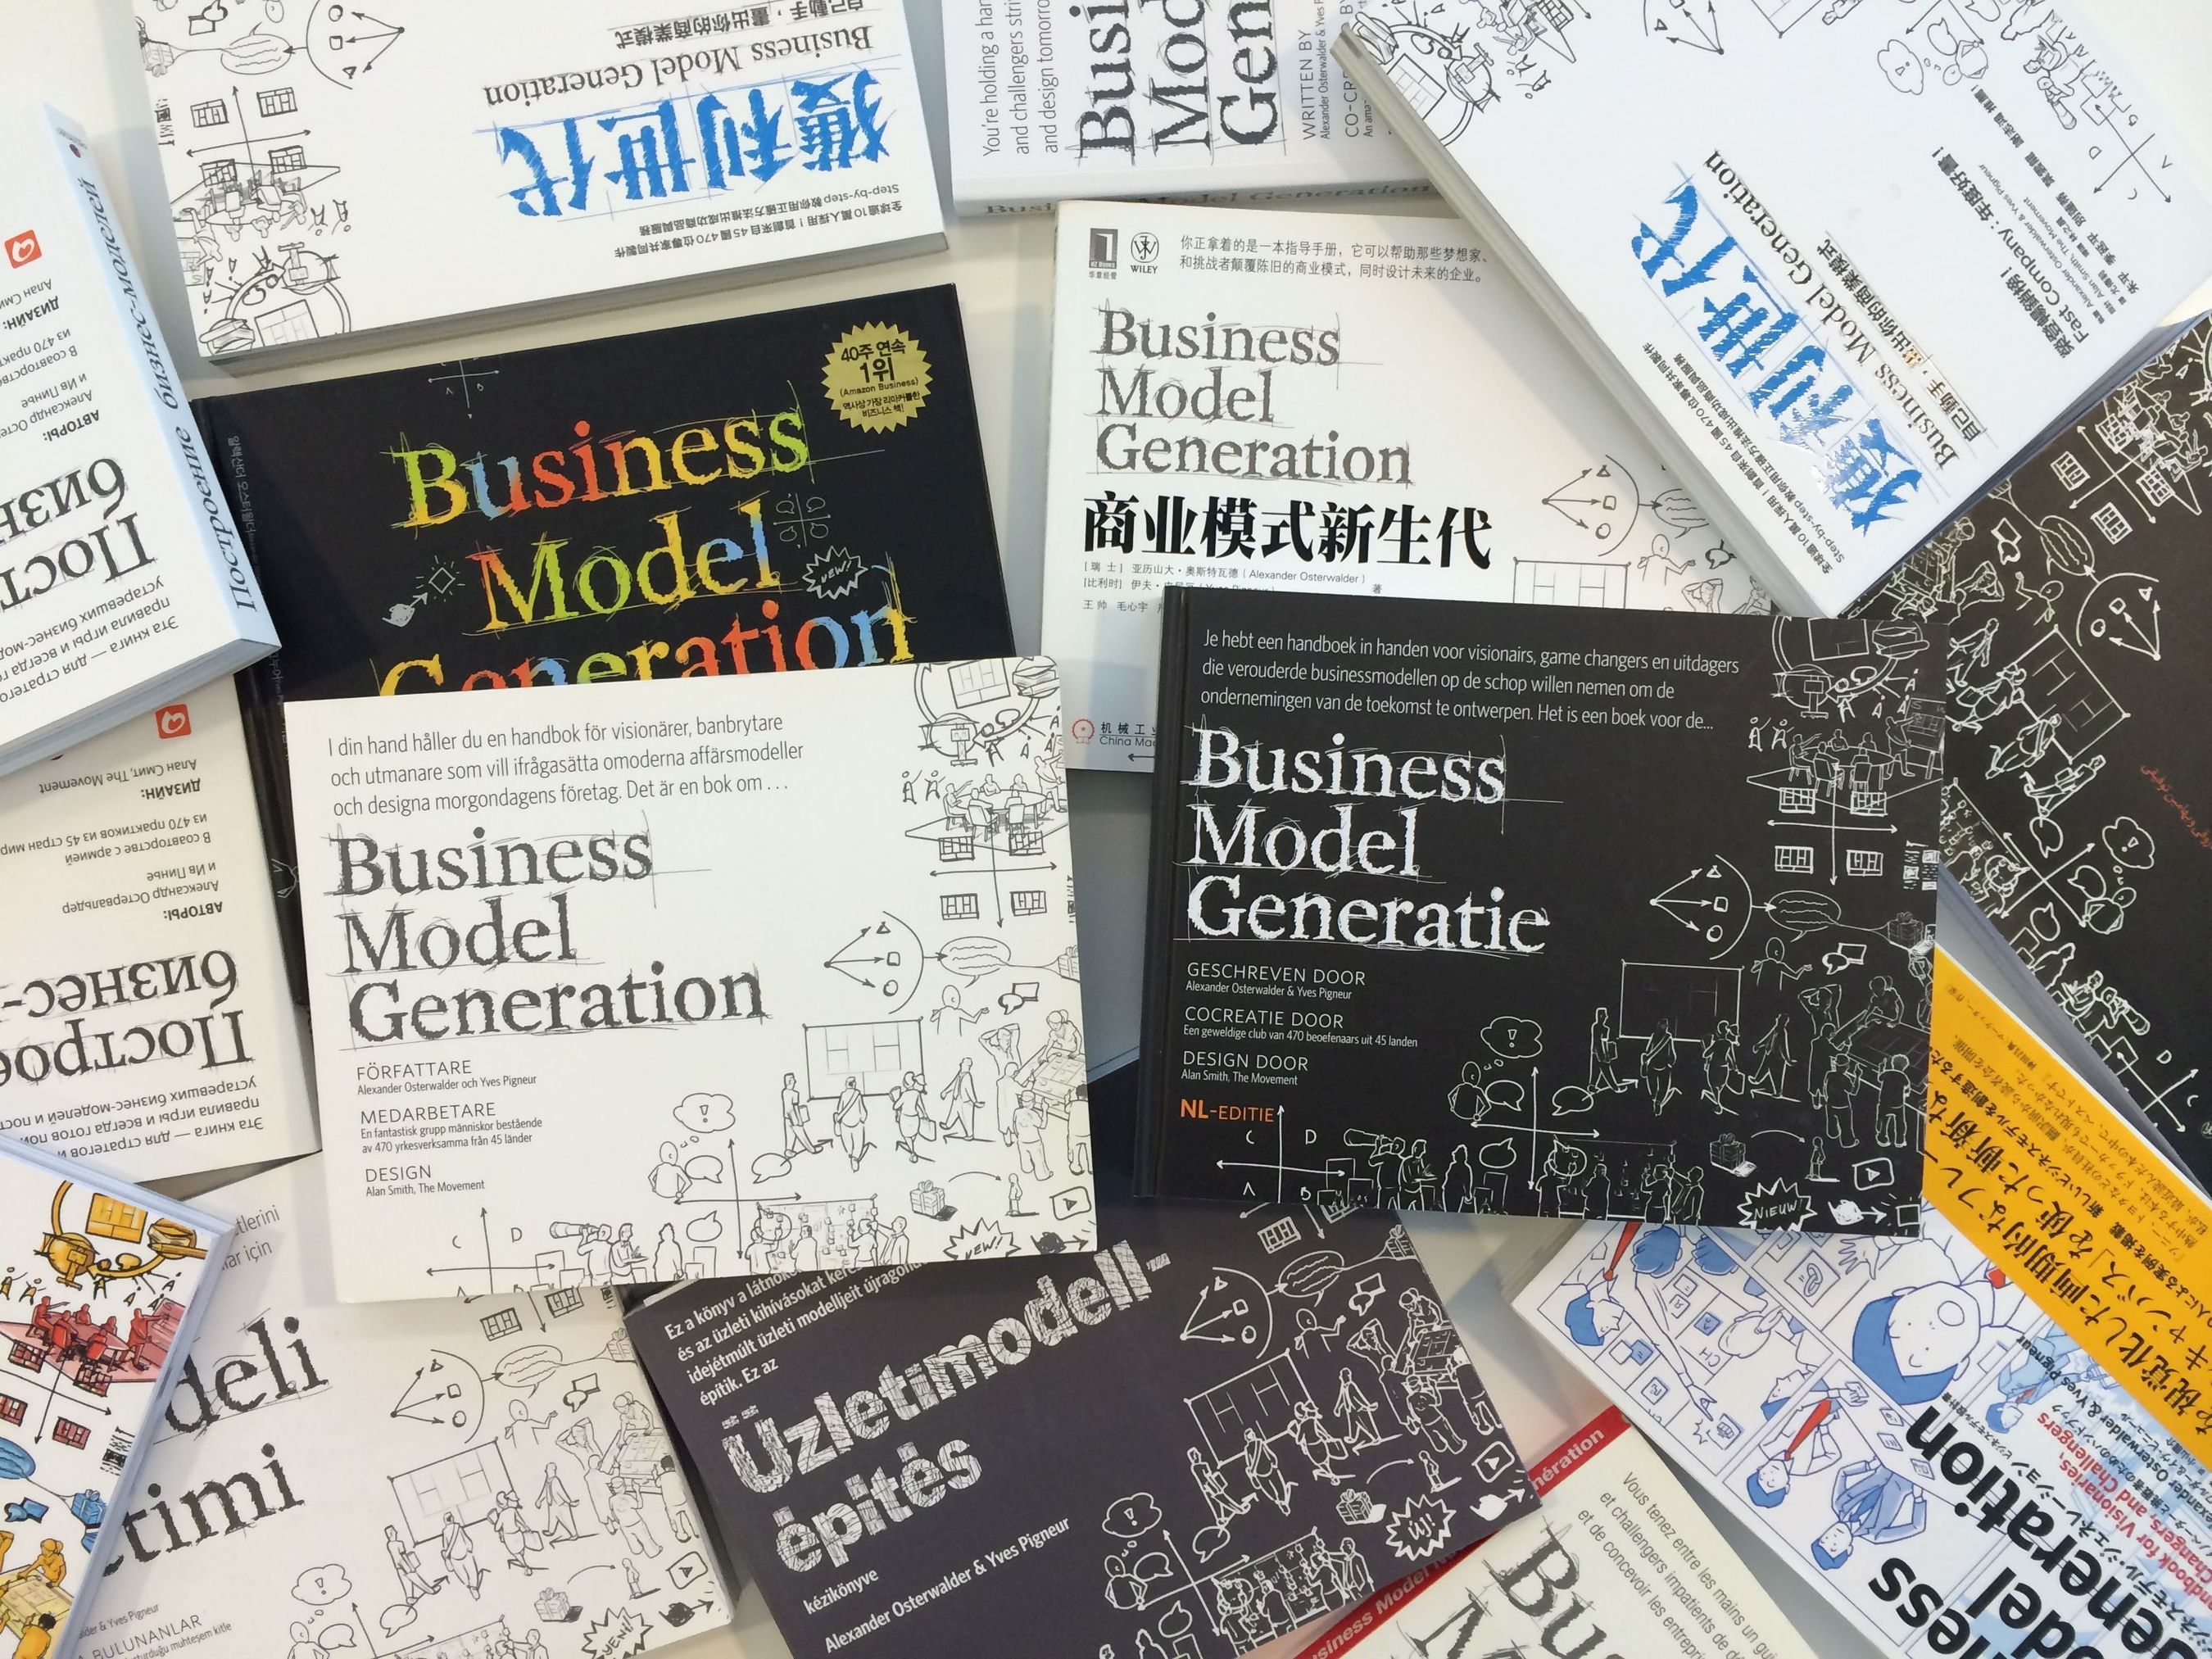 This month saw the milestone of 1 million copies of international bestseller Business Model Generation sold. The book, which was written by Alexander Osterwalder and Yves Pigneur, was self-published in 2009 by Patrick van der Pijl (CEO of Amsterdam-based Business Models Inc.). Business Model Generation grew to become a global management classic and has gone to print in 30 languages including Chinese, Japanese, Korean, Russian, German and Spanish, in addition to English. (PRNewsFoto/Business Models Inc)